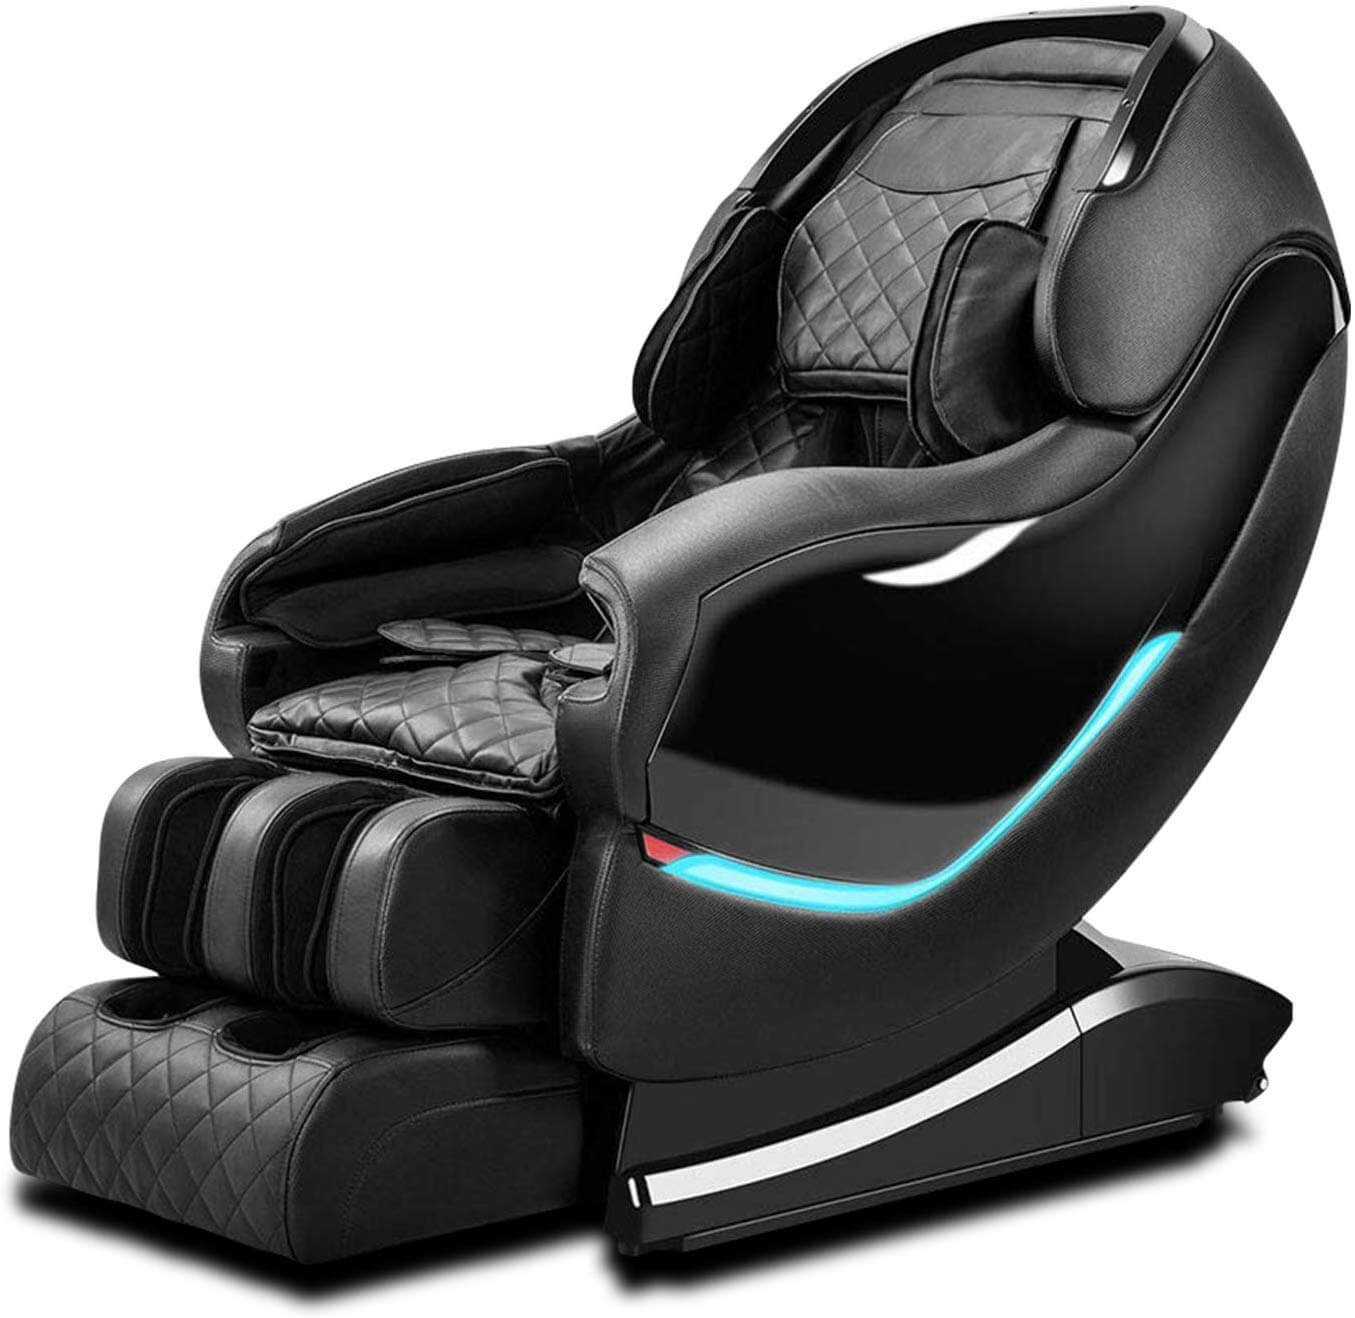 3 Top Rated Massage Chairs Pros and Cons & Specifications